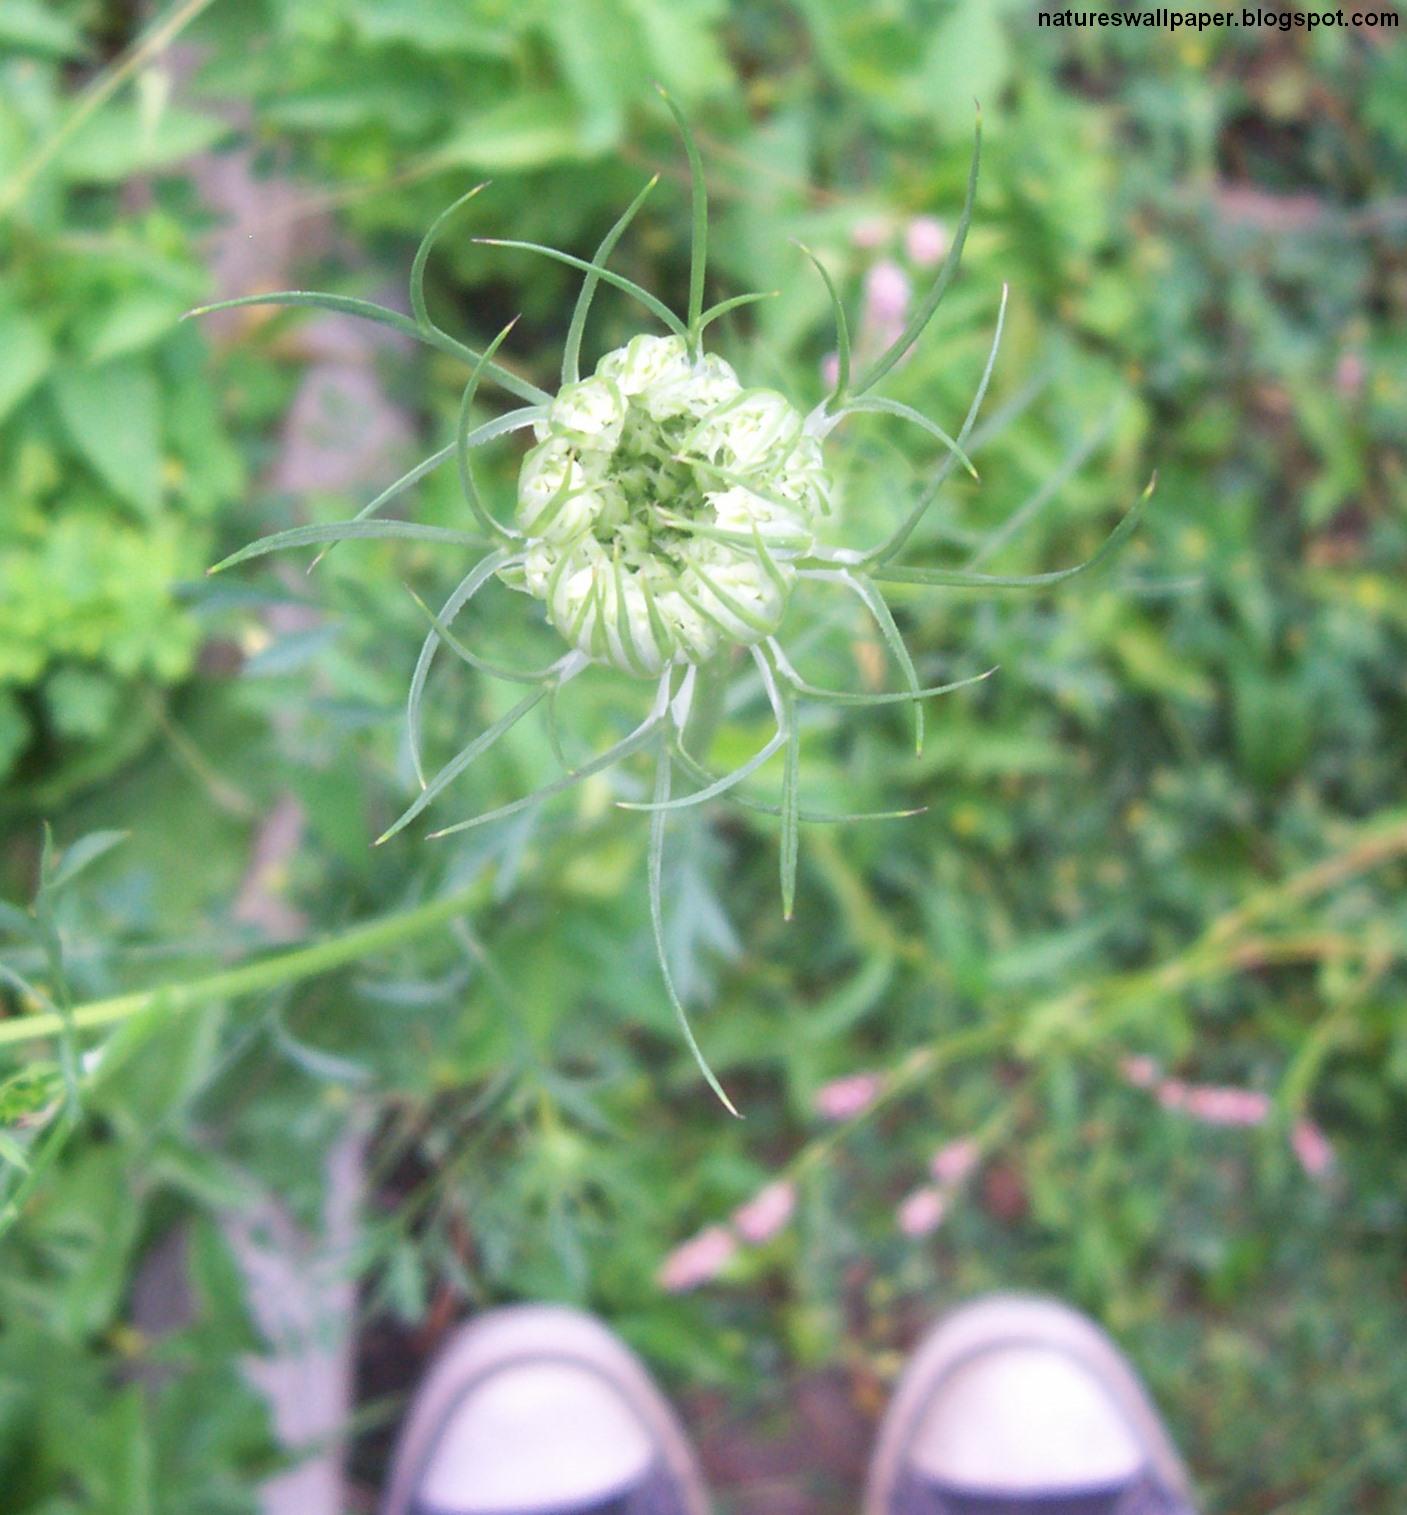 [My+Converses+With+A+Weed+In+Focus.jpg]